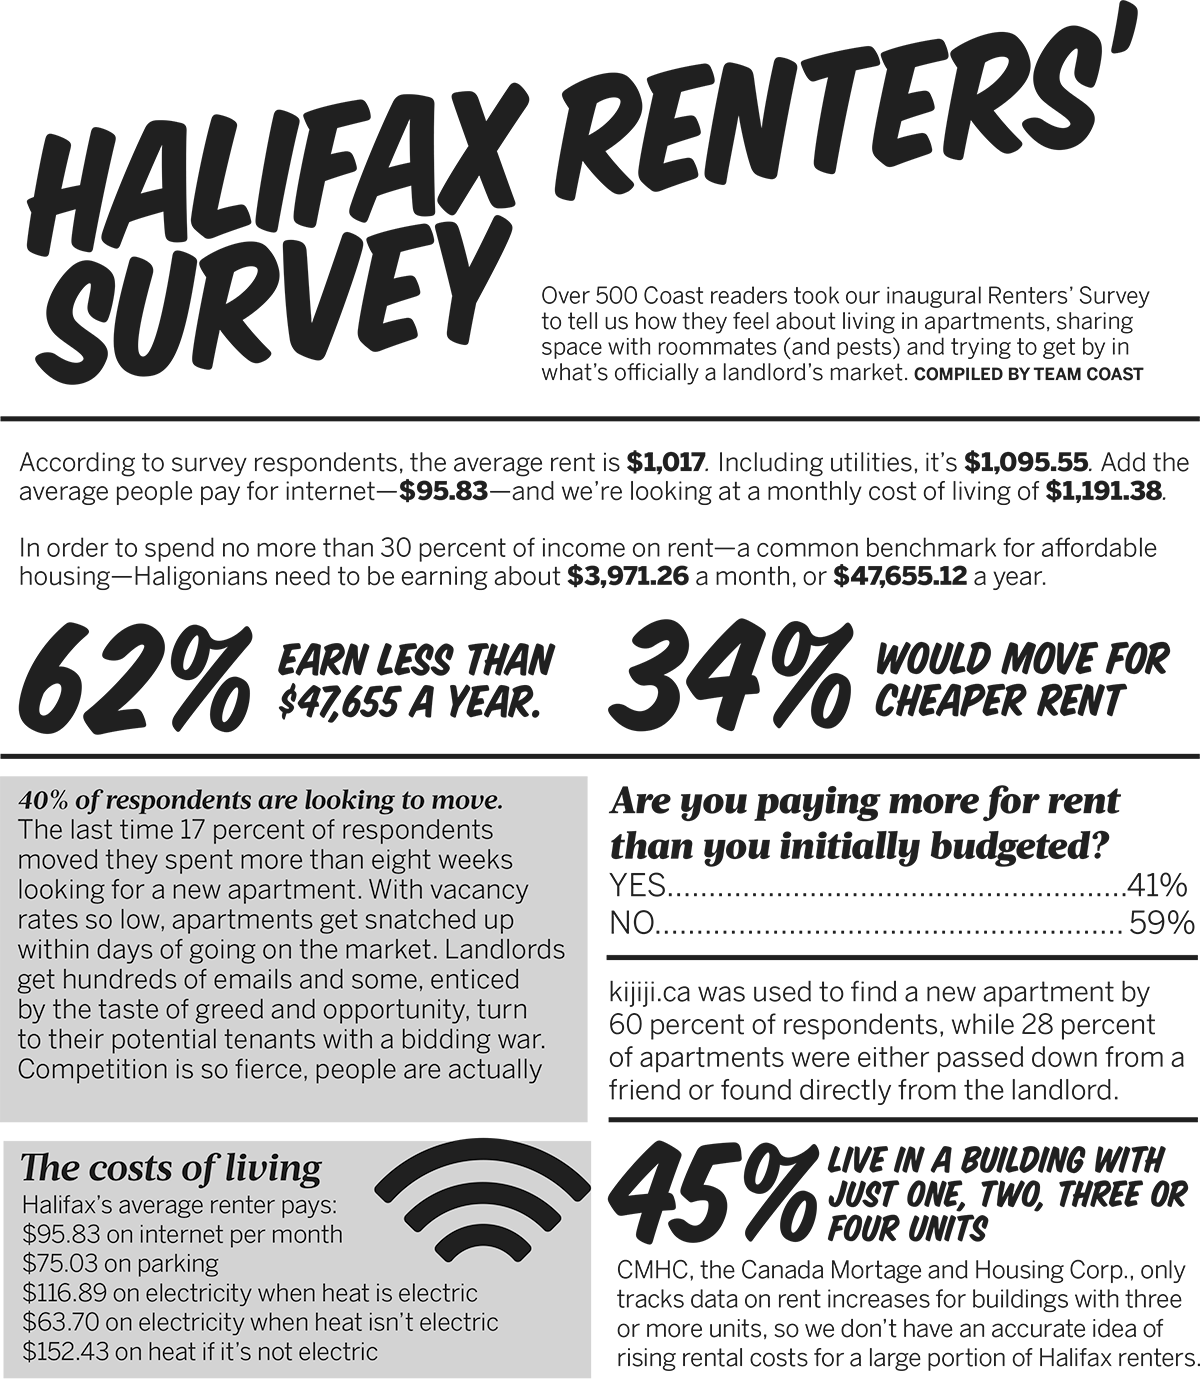 Burning Thoughts About Renting In Halifax From The